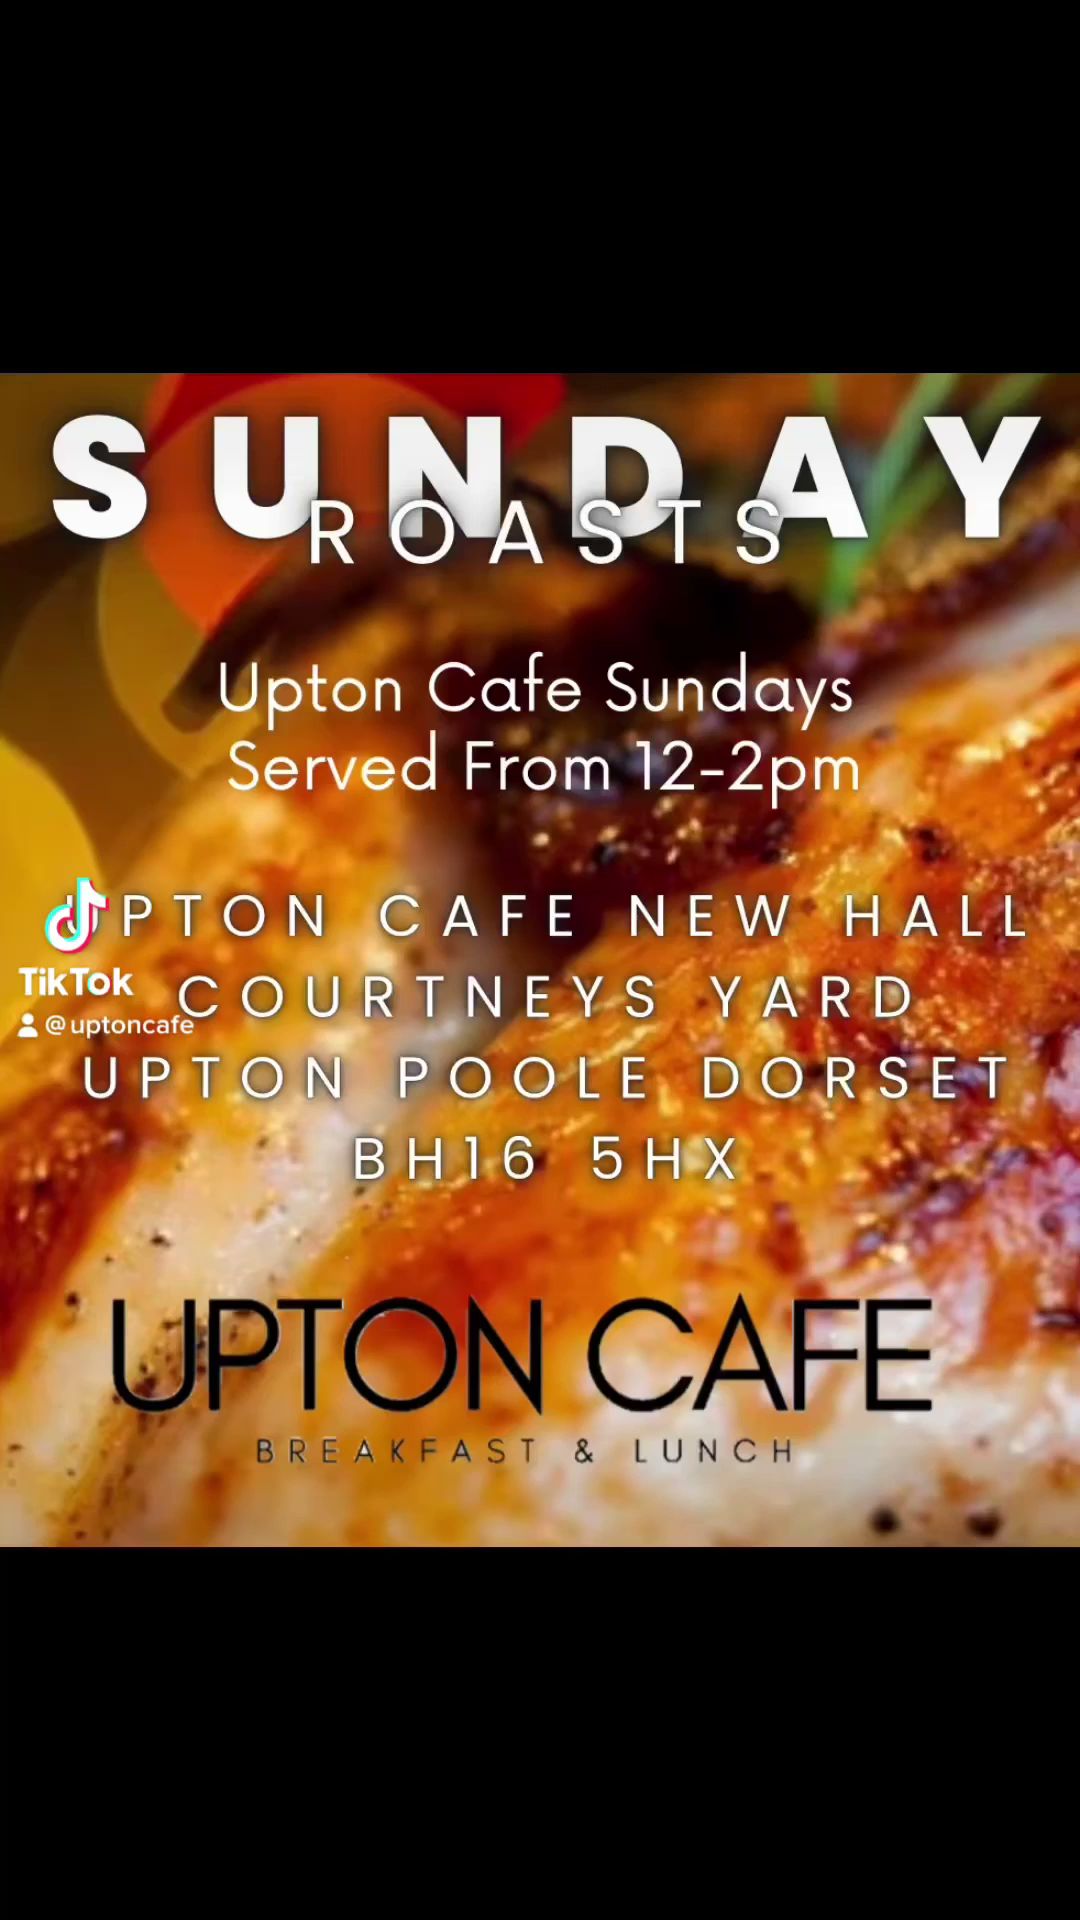 The Upton Cafe